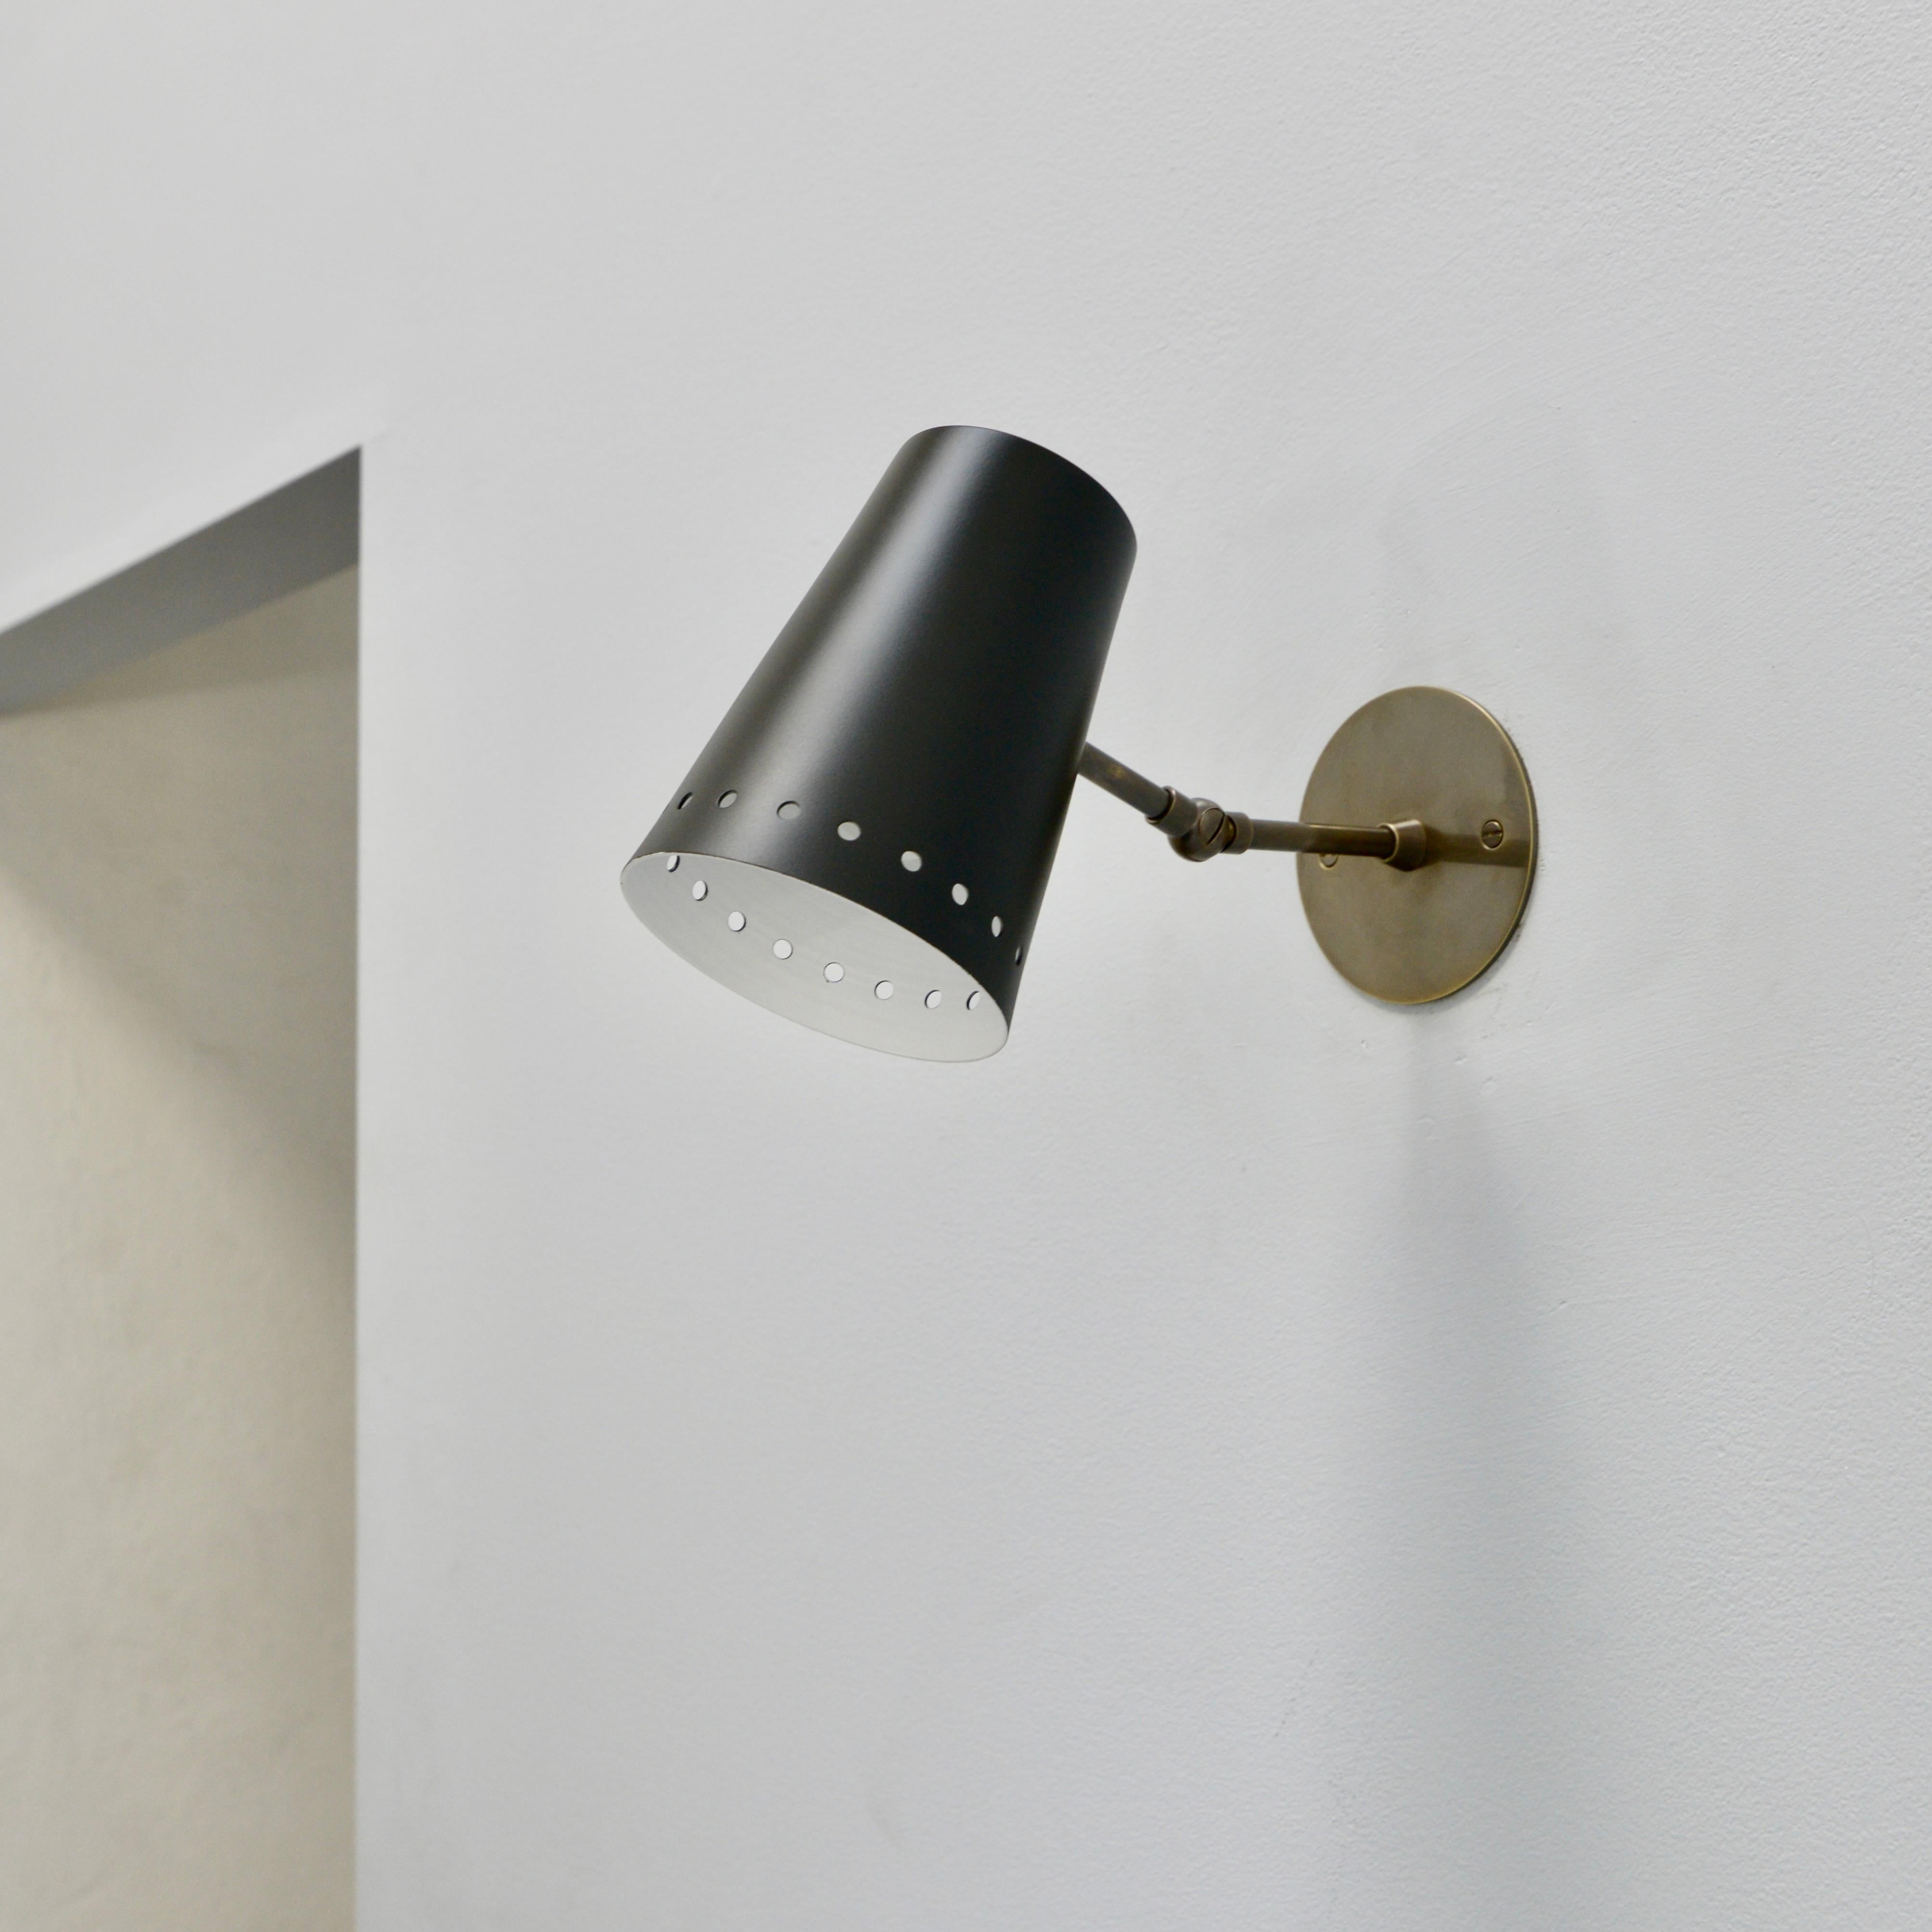 Directional LUmmer sconce by Lumfardo Luminaires. Based in a German design the sconce is made In patina brass and a painted aluminum shade. E12 candelabra based socket. Priced individually. Lightbulbs and mounting hardware supplied with